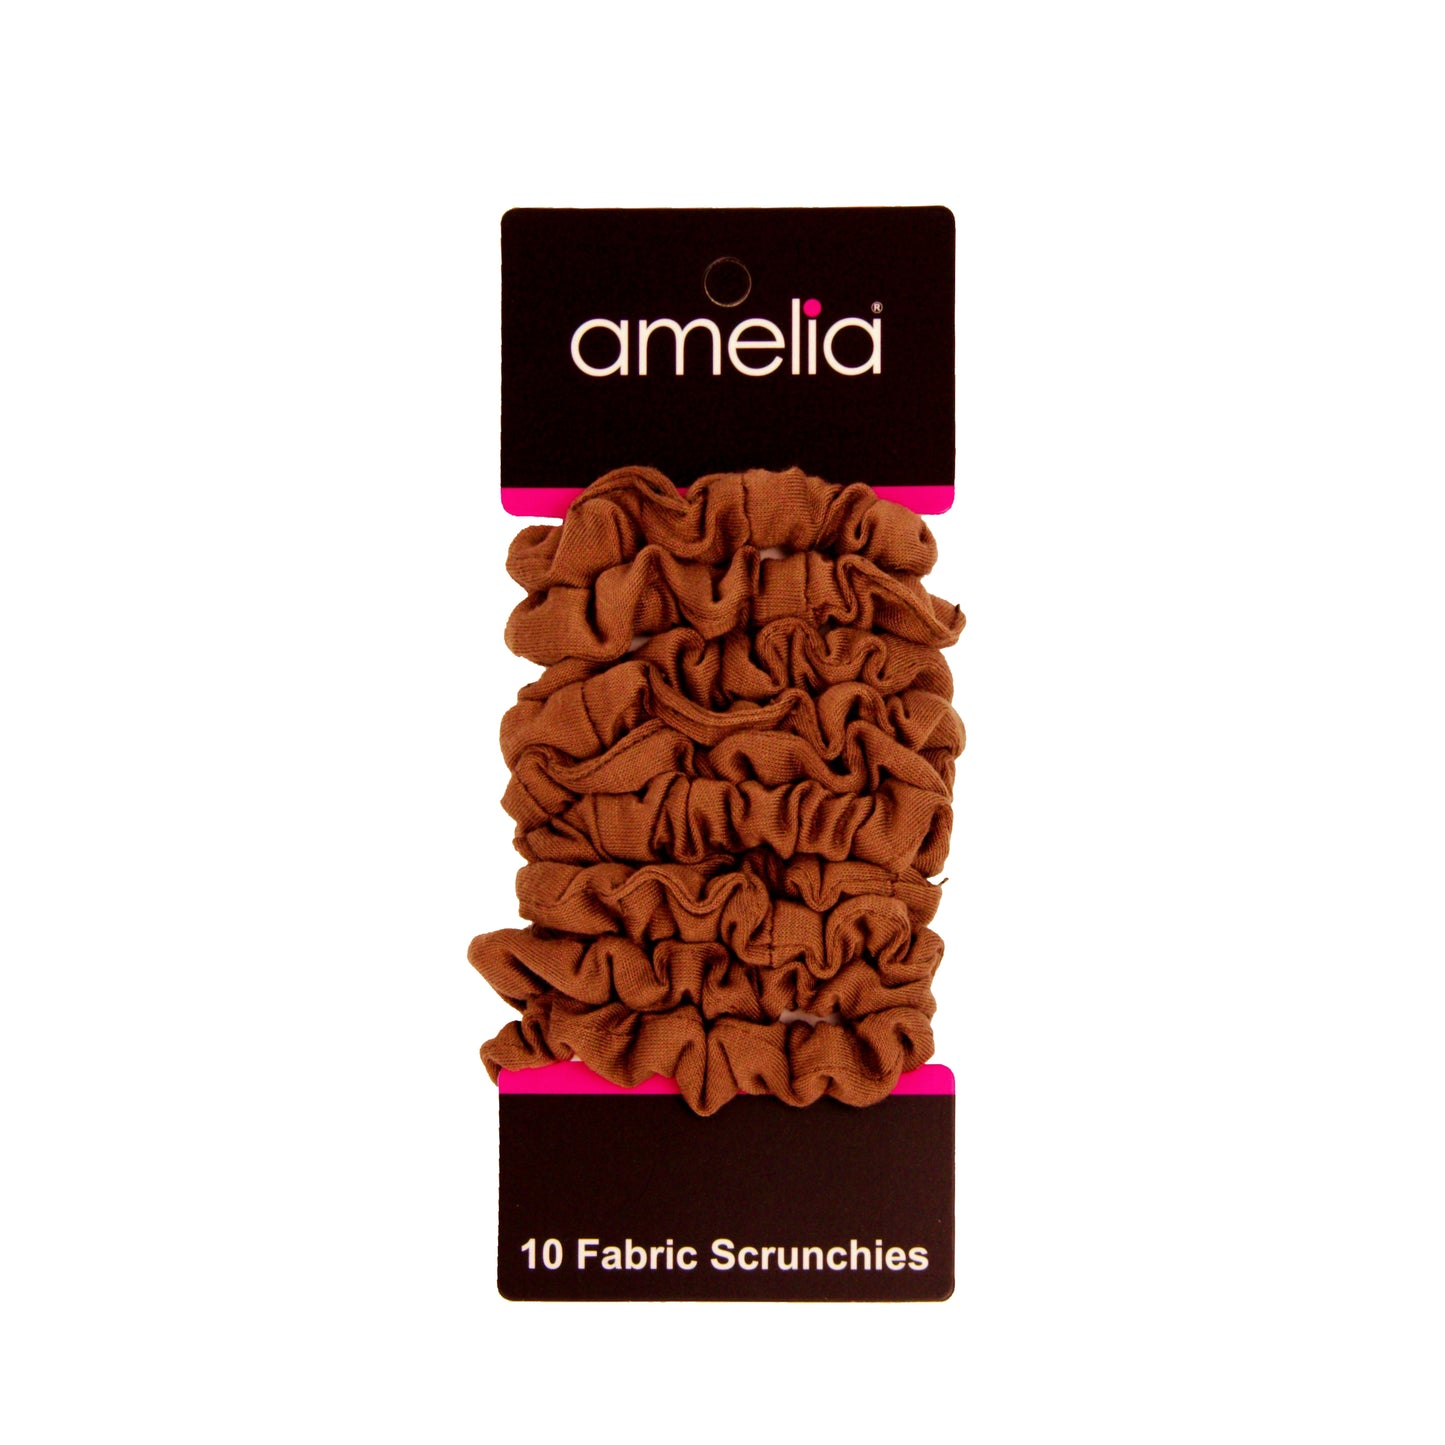 Amelia Beauty, Medium Brown Jersey Scrunchies, 2.5in Diameter, Gentle on Hair, Strong Hold, No Snag, No Dents or Creases. 10 Pack